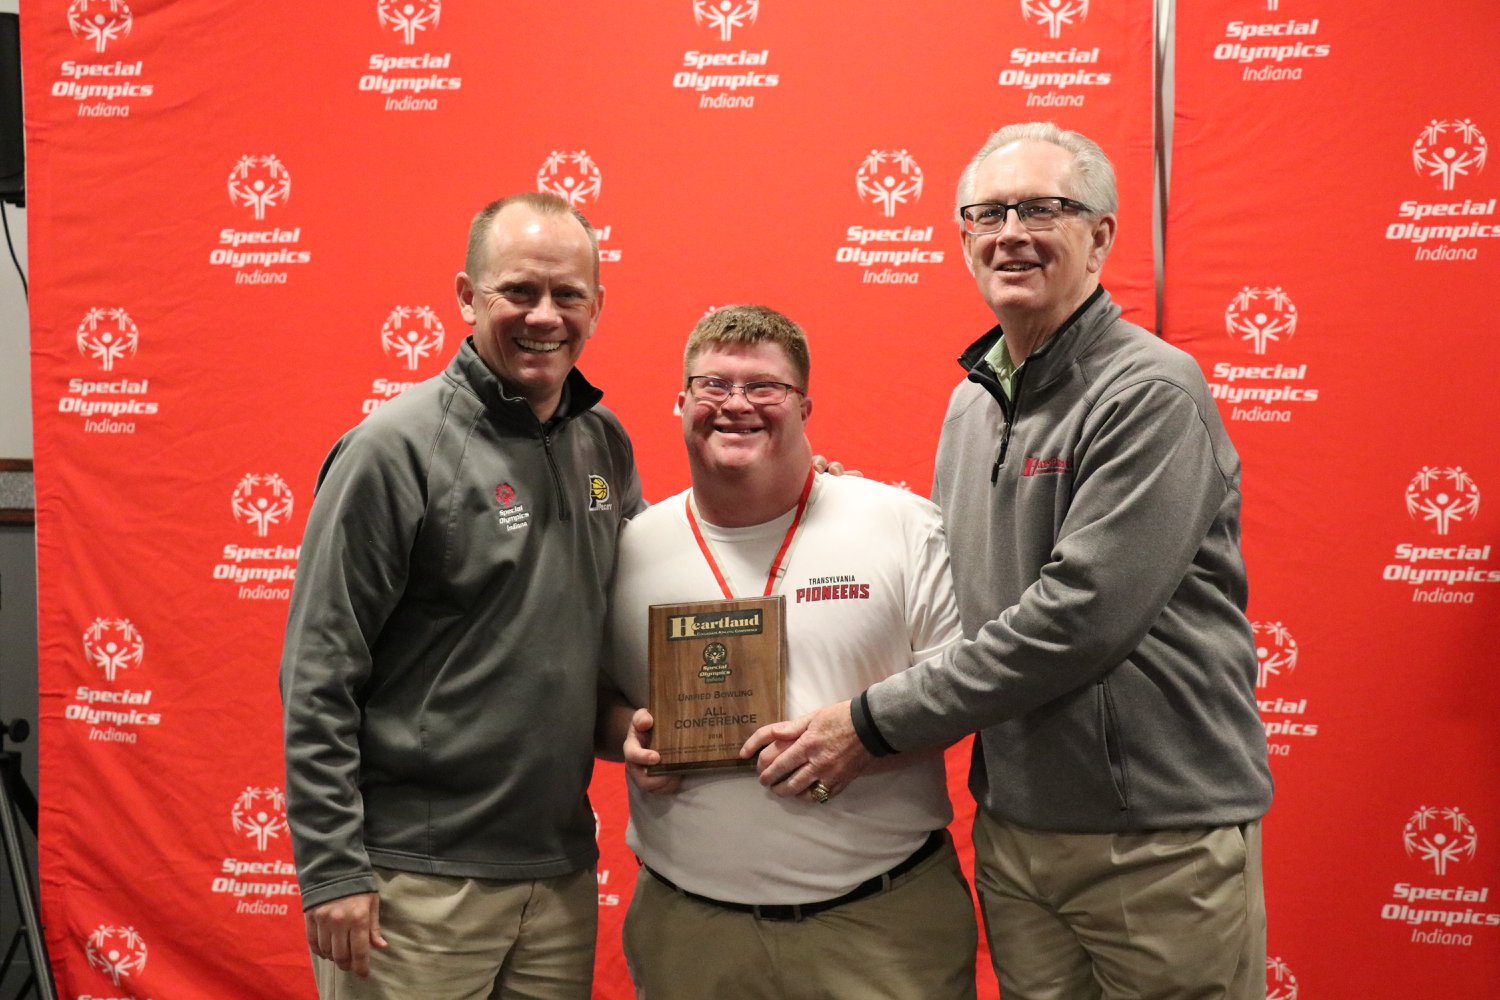 SOKY, Transy Team Up at HCAC Unified Bowling Tournament